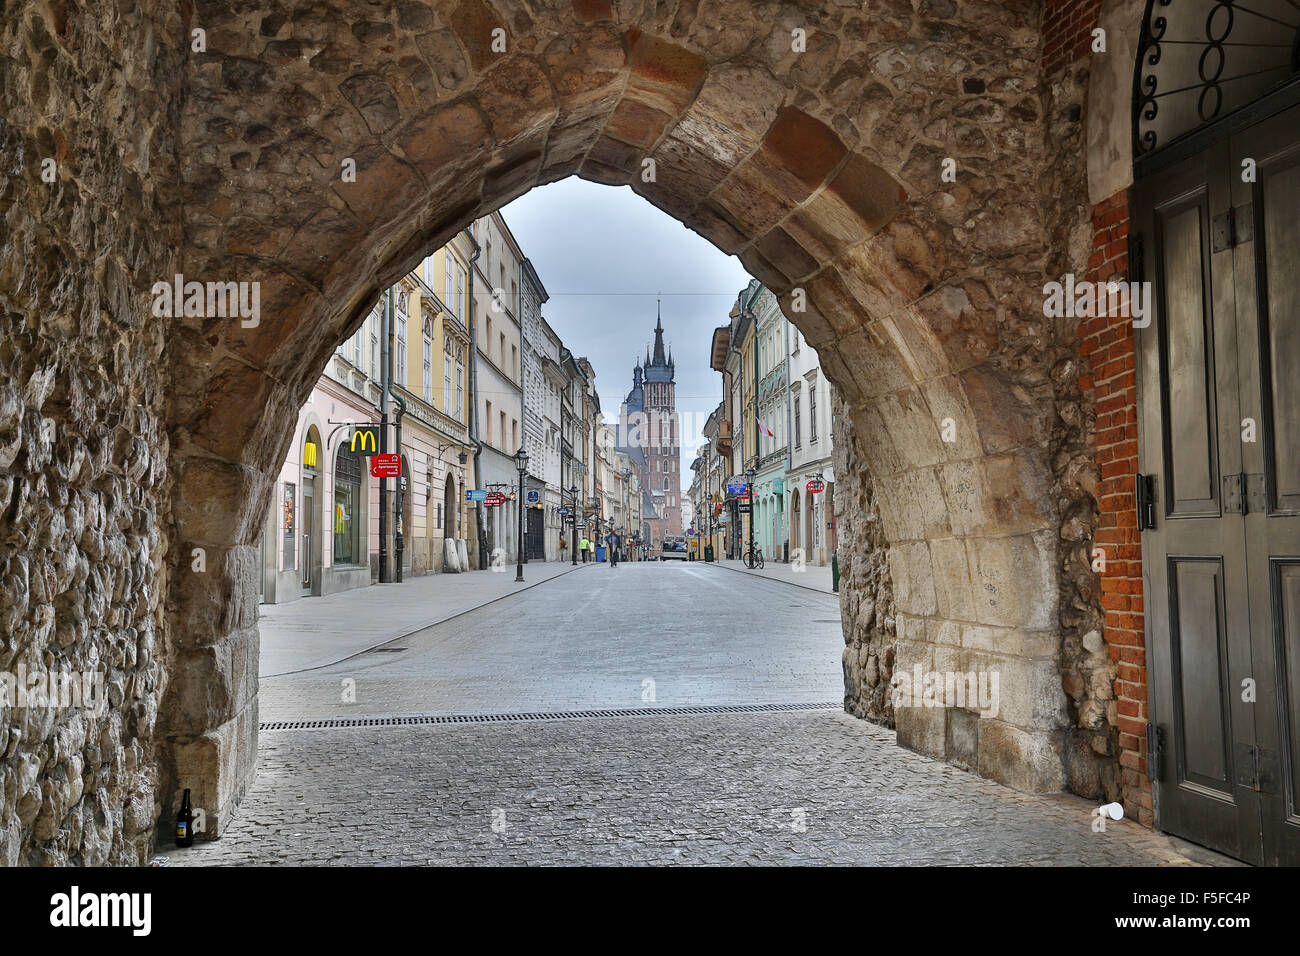 City walls and The Old Town streets. Krakow. Stock Photo